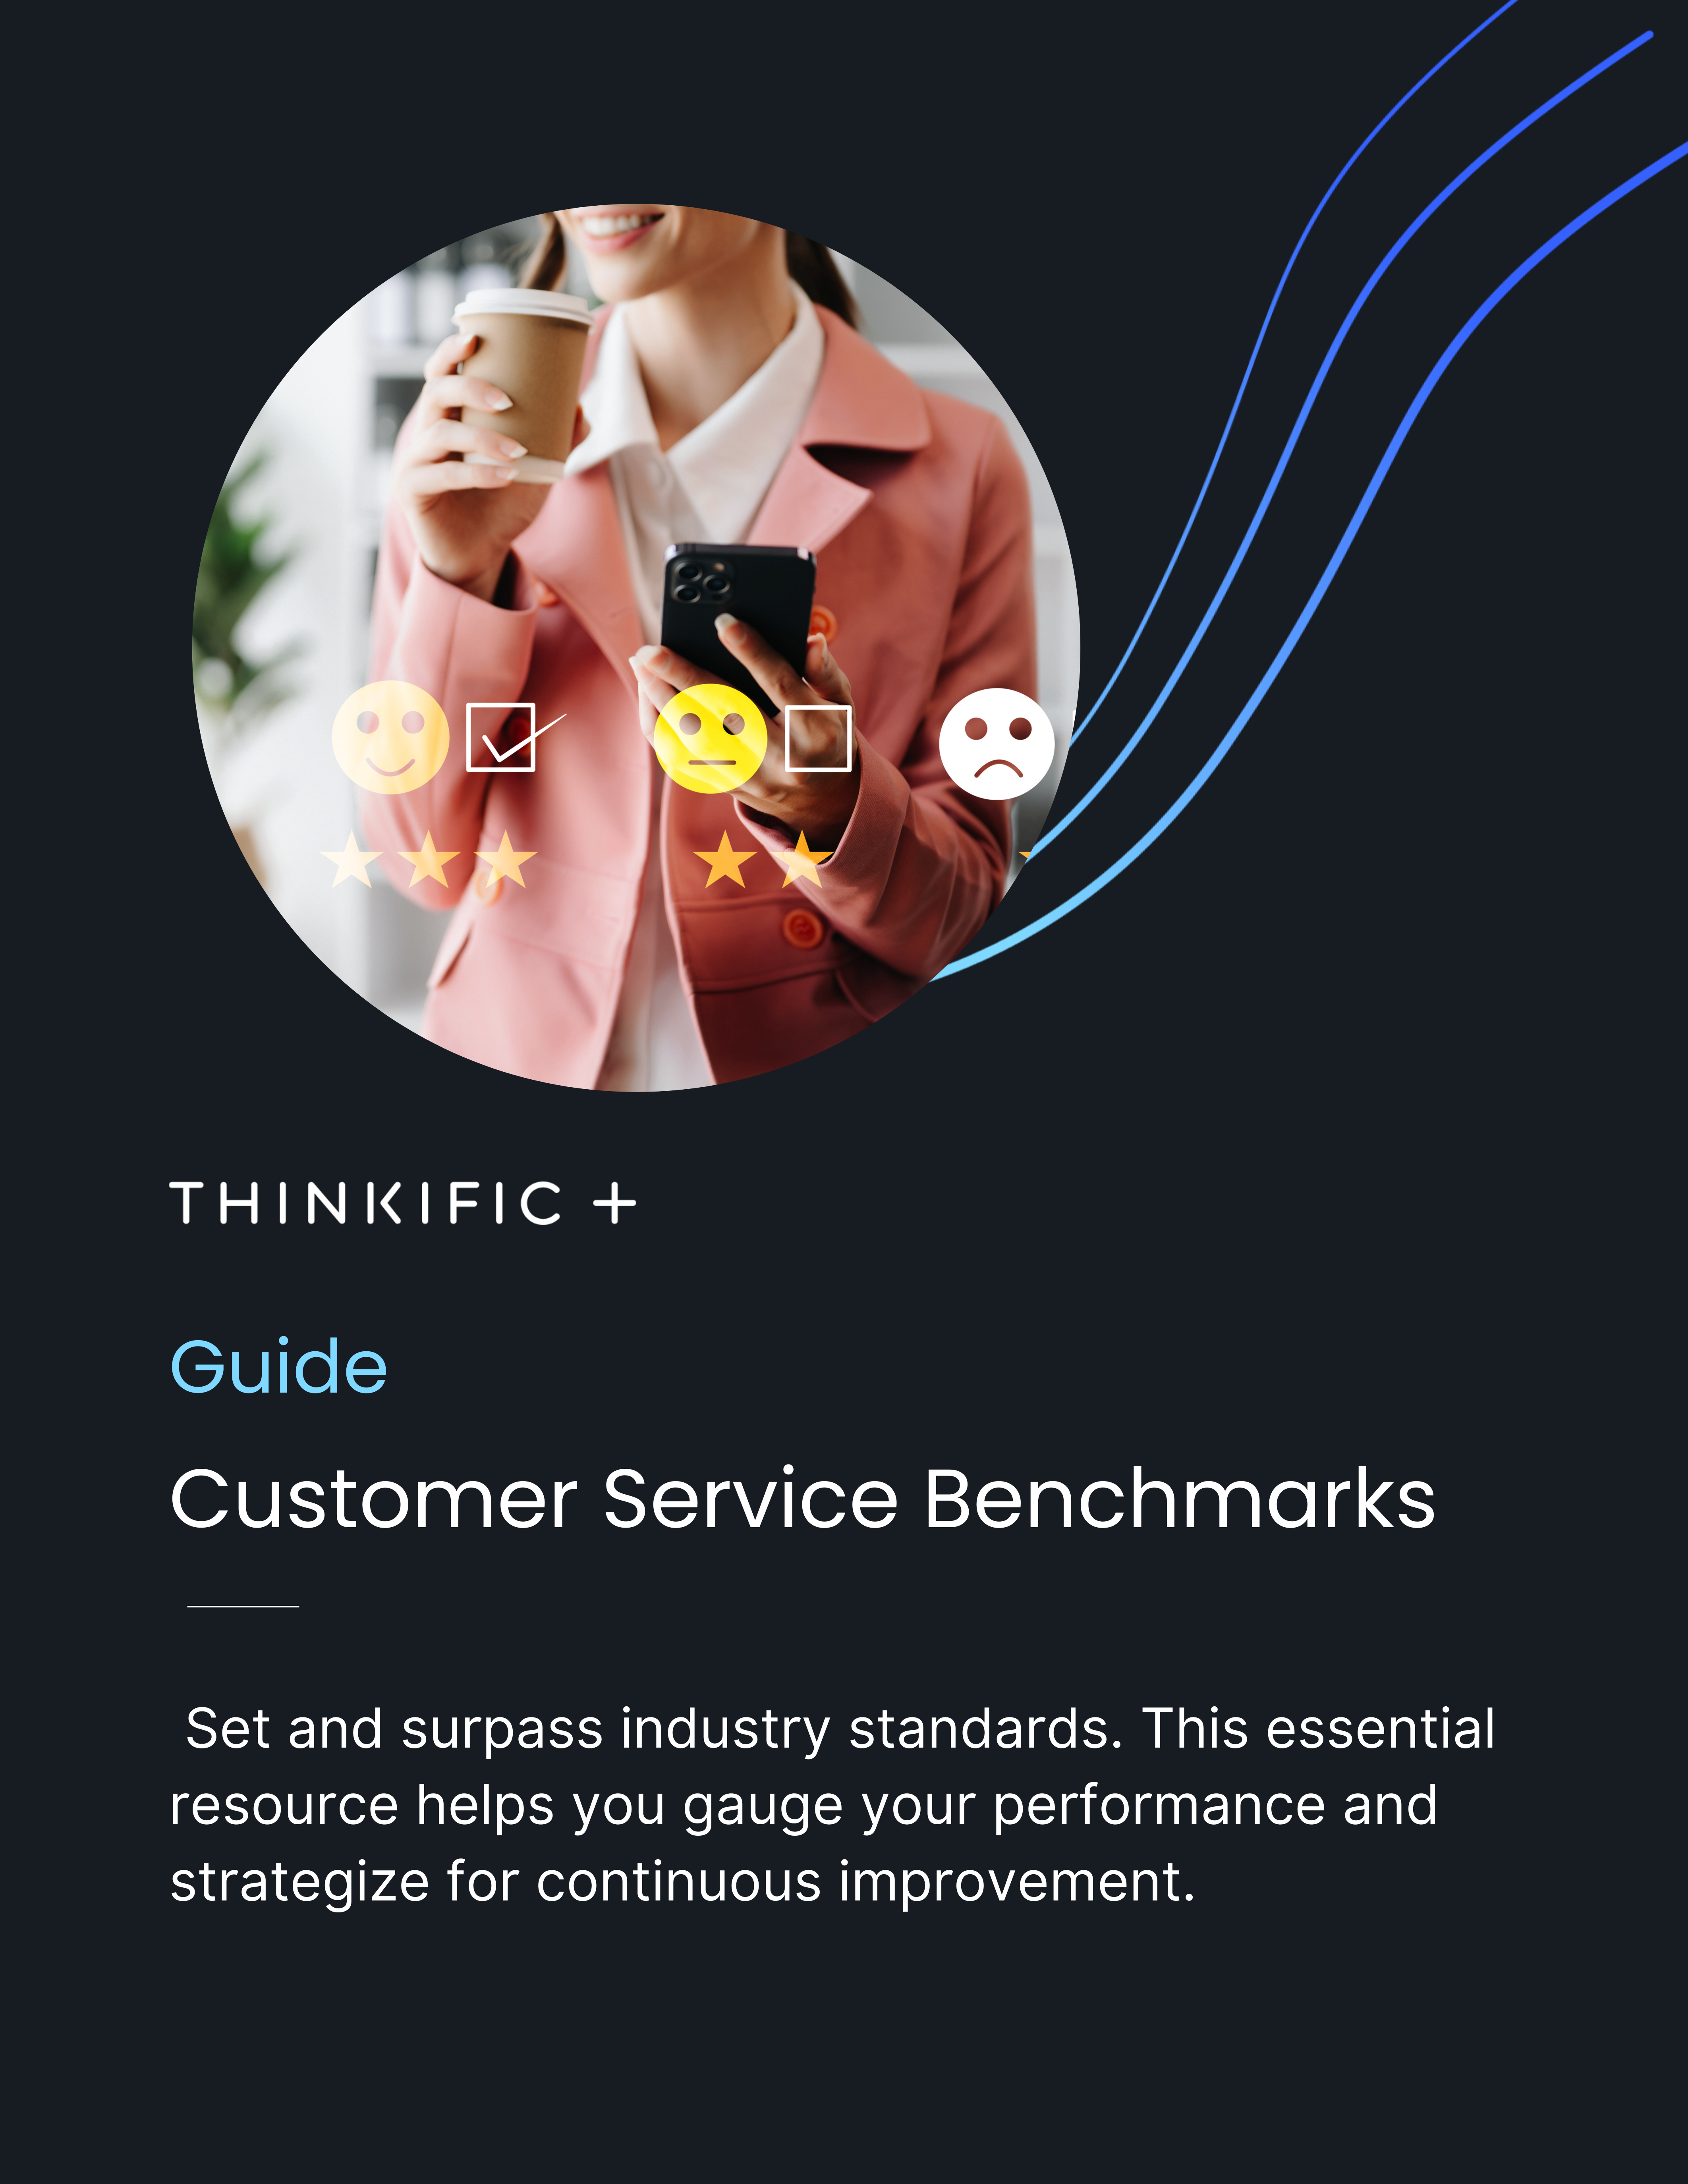 Free Guide to Customer Service Benchmarks: Download Now